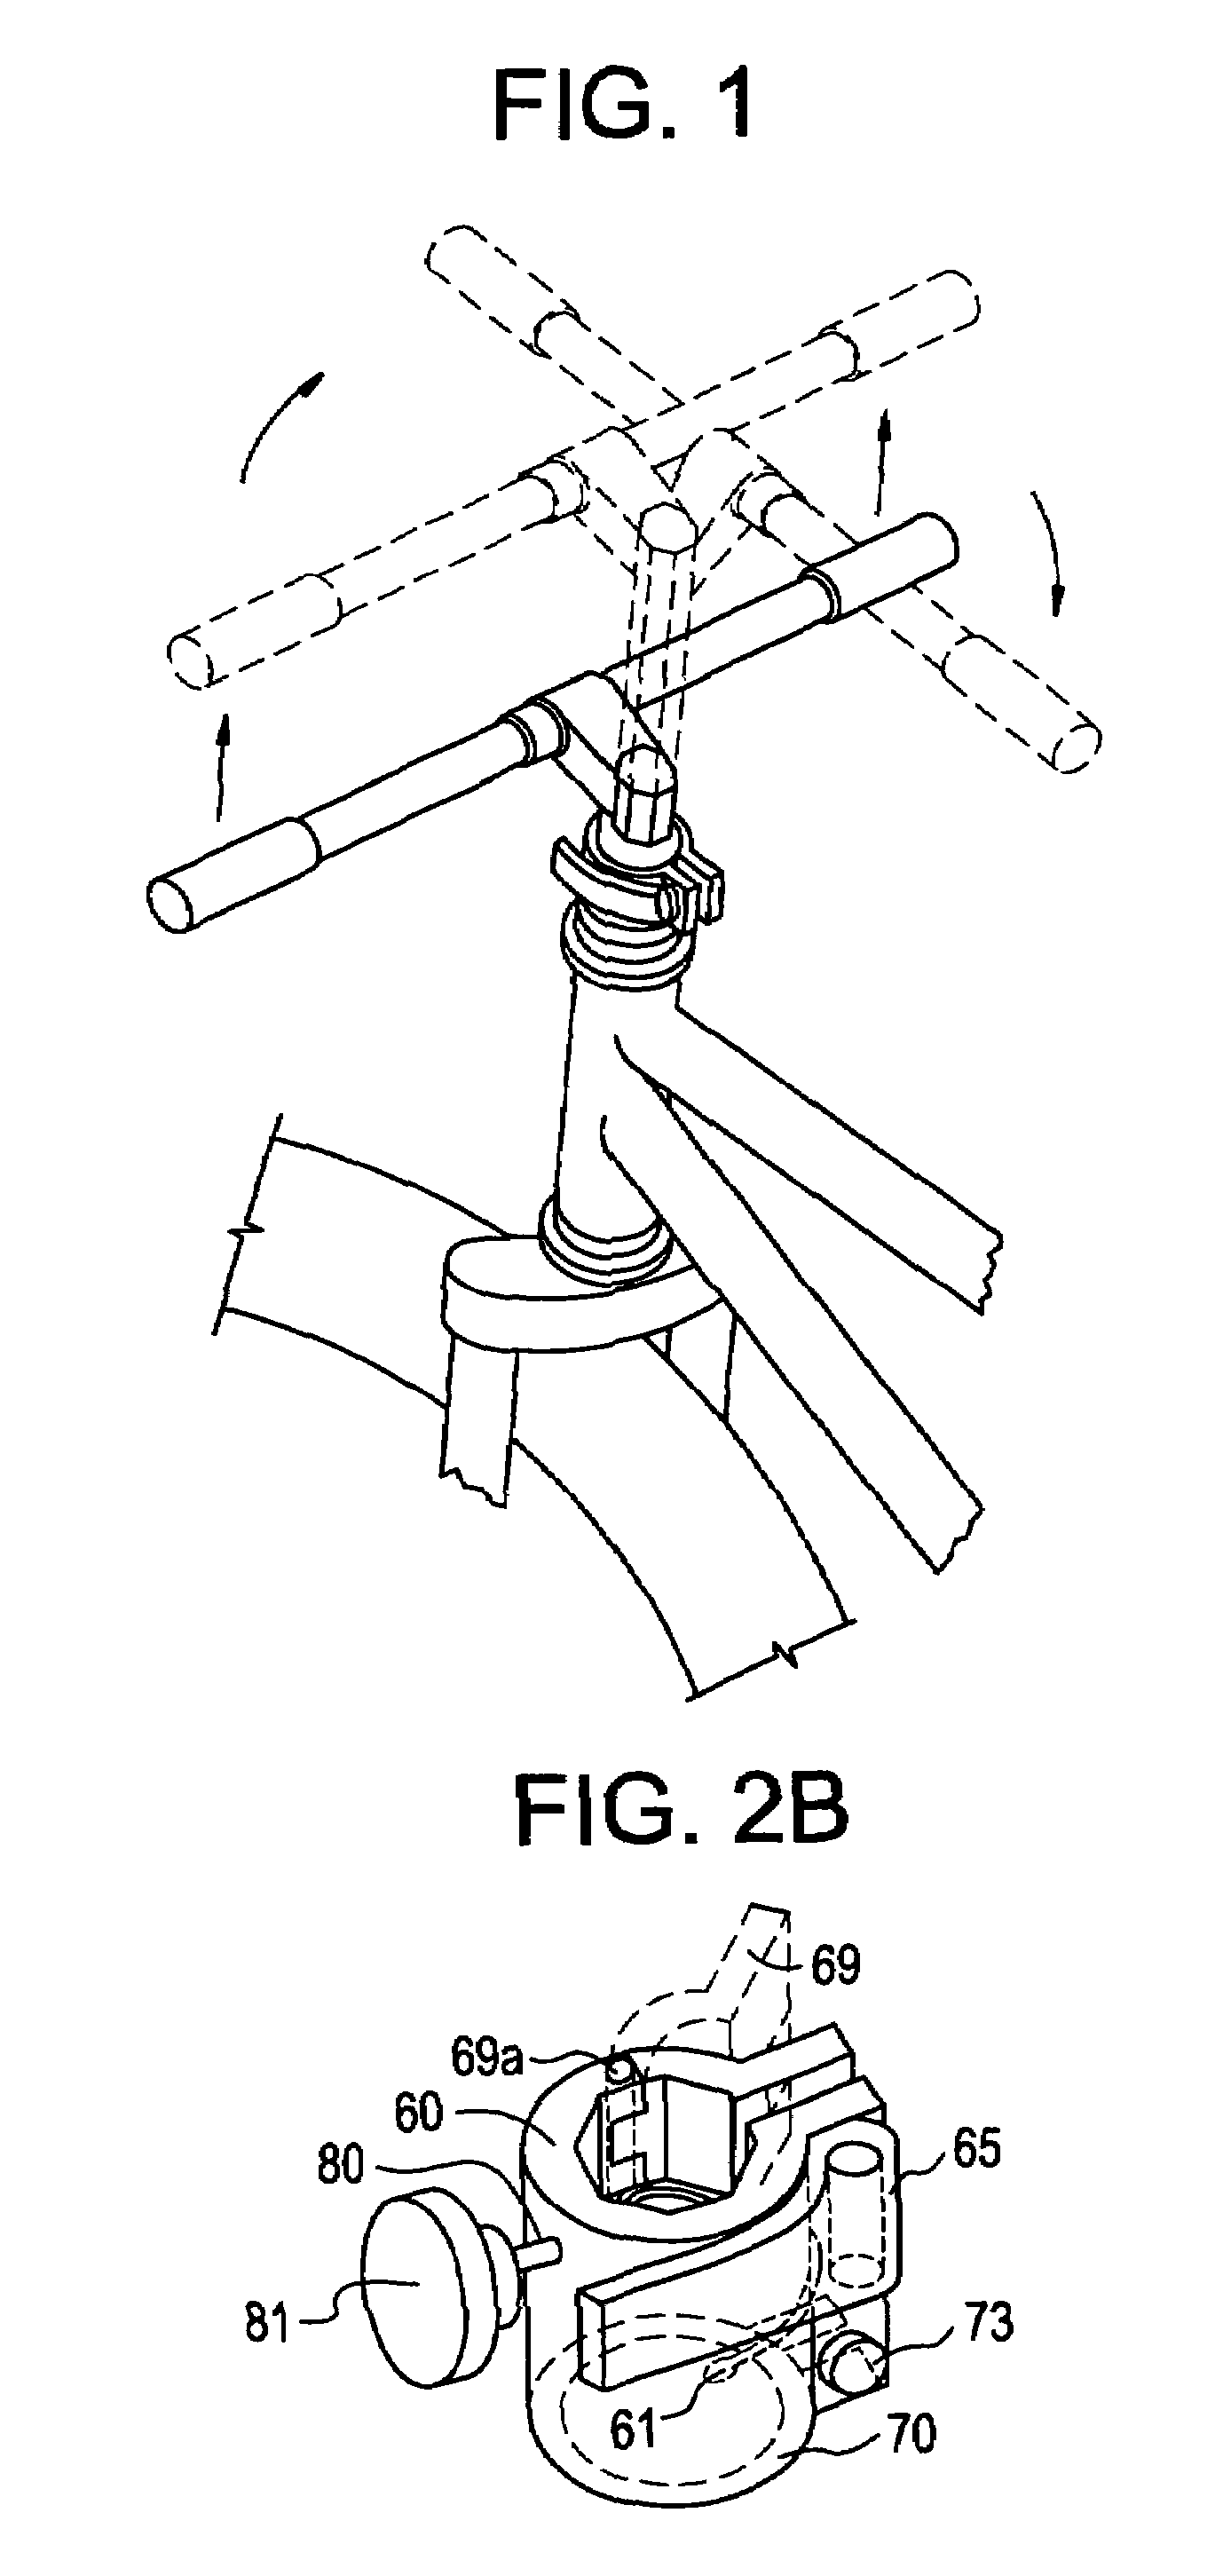 Manually height adjustable and rotatable steering assembly for bicycles